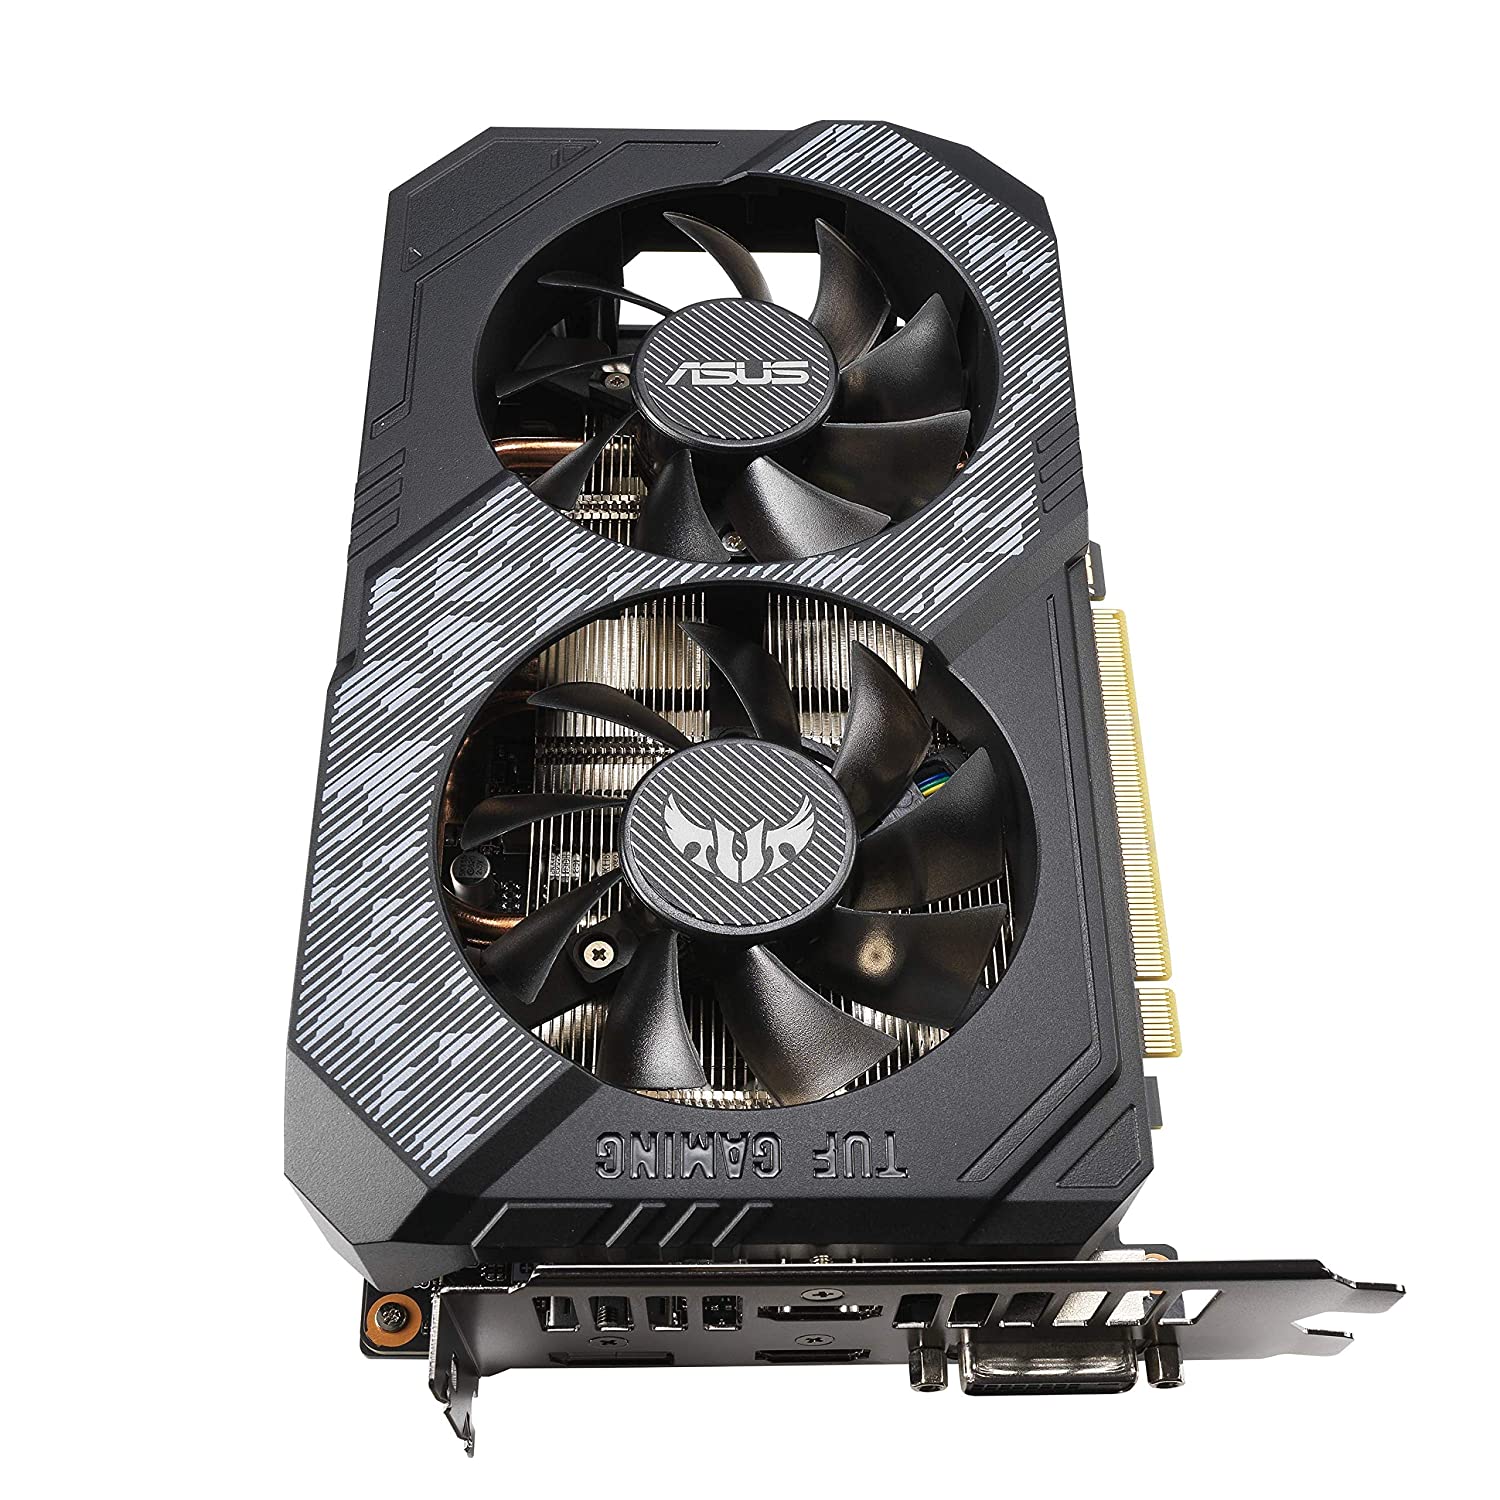 ASUS_TUF_Gaming_GeForce_RTX_2060_OC_Graphics_Card_From_The_Peripheral_Store_05